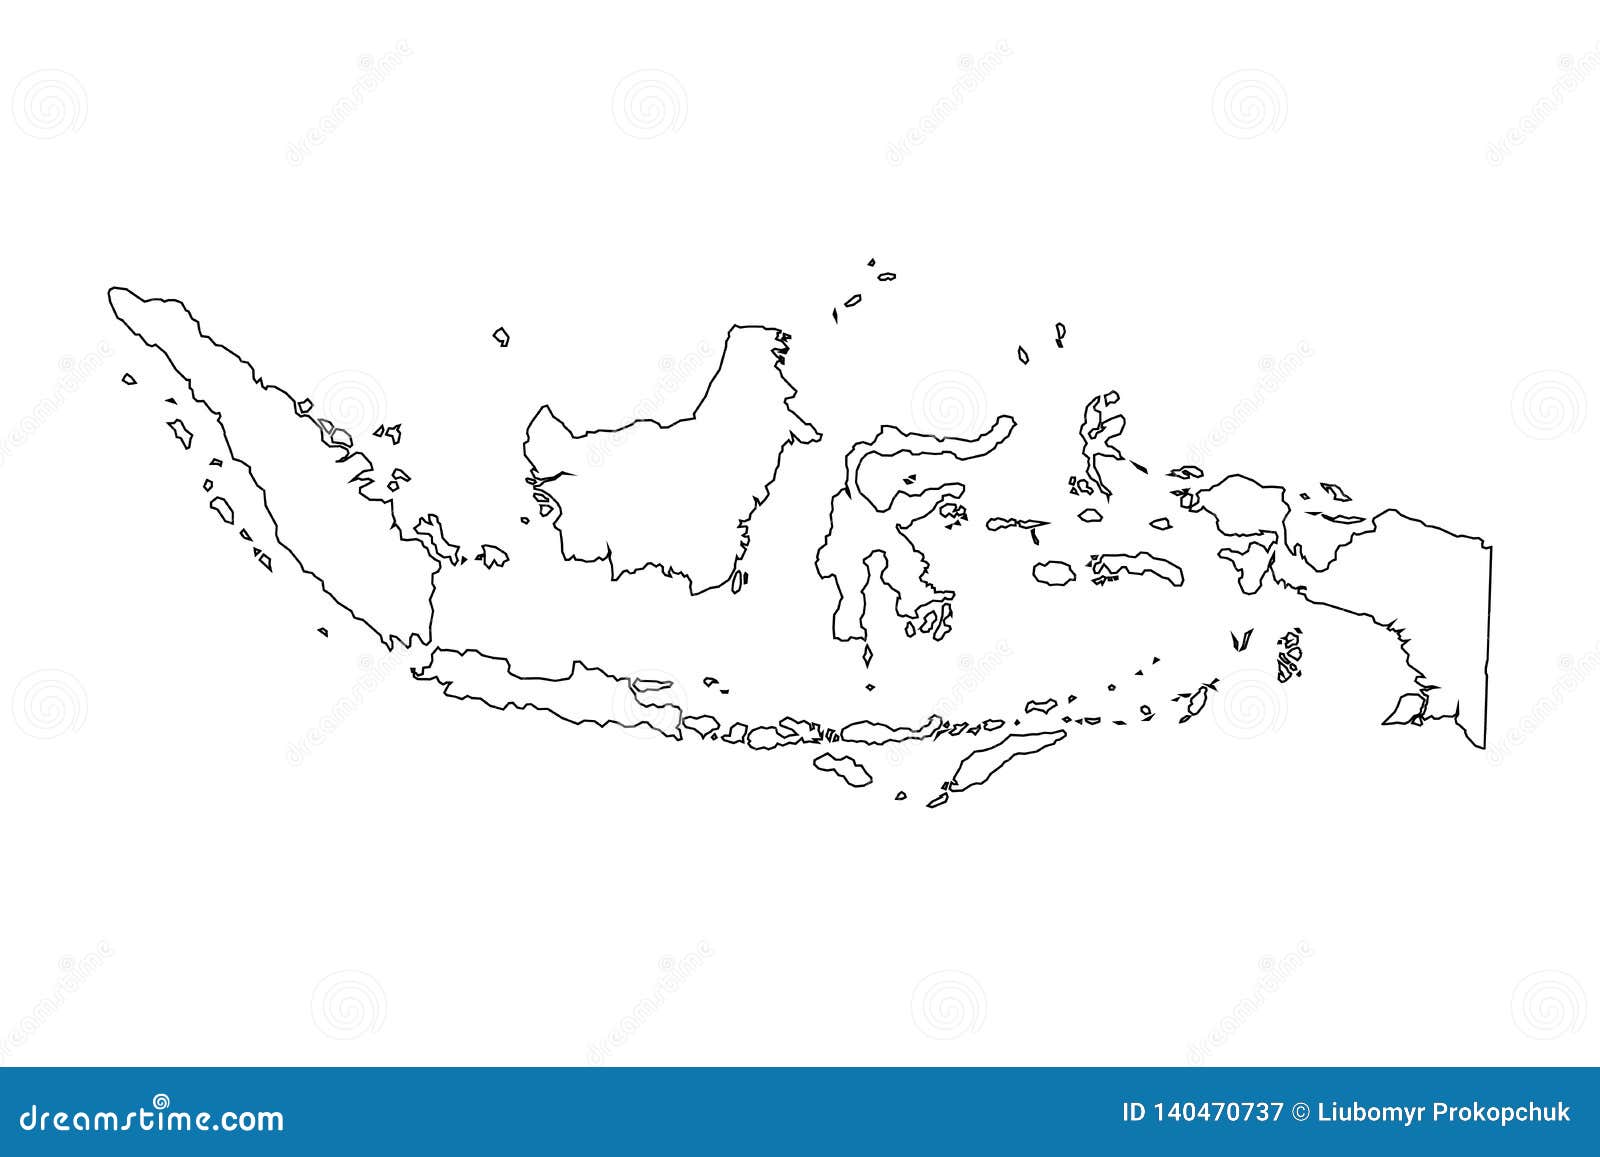  Indonesia Map Outline  Graphic Freehand Drawing On White 